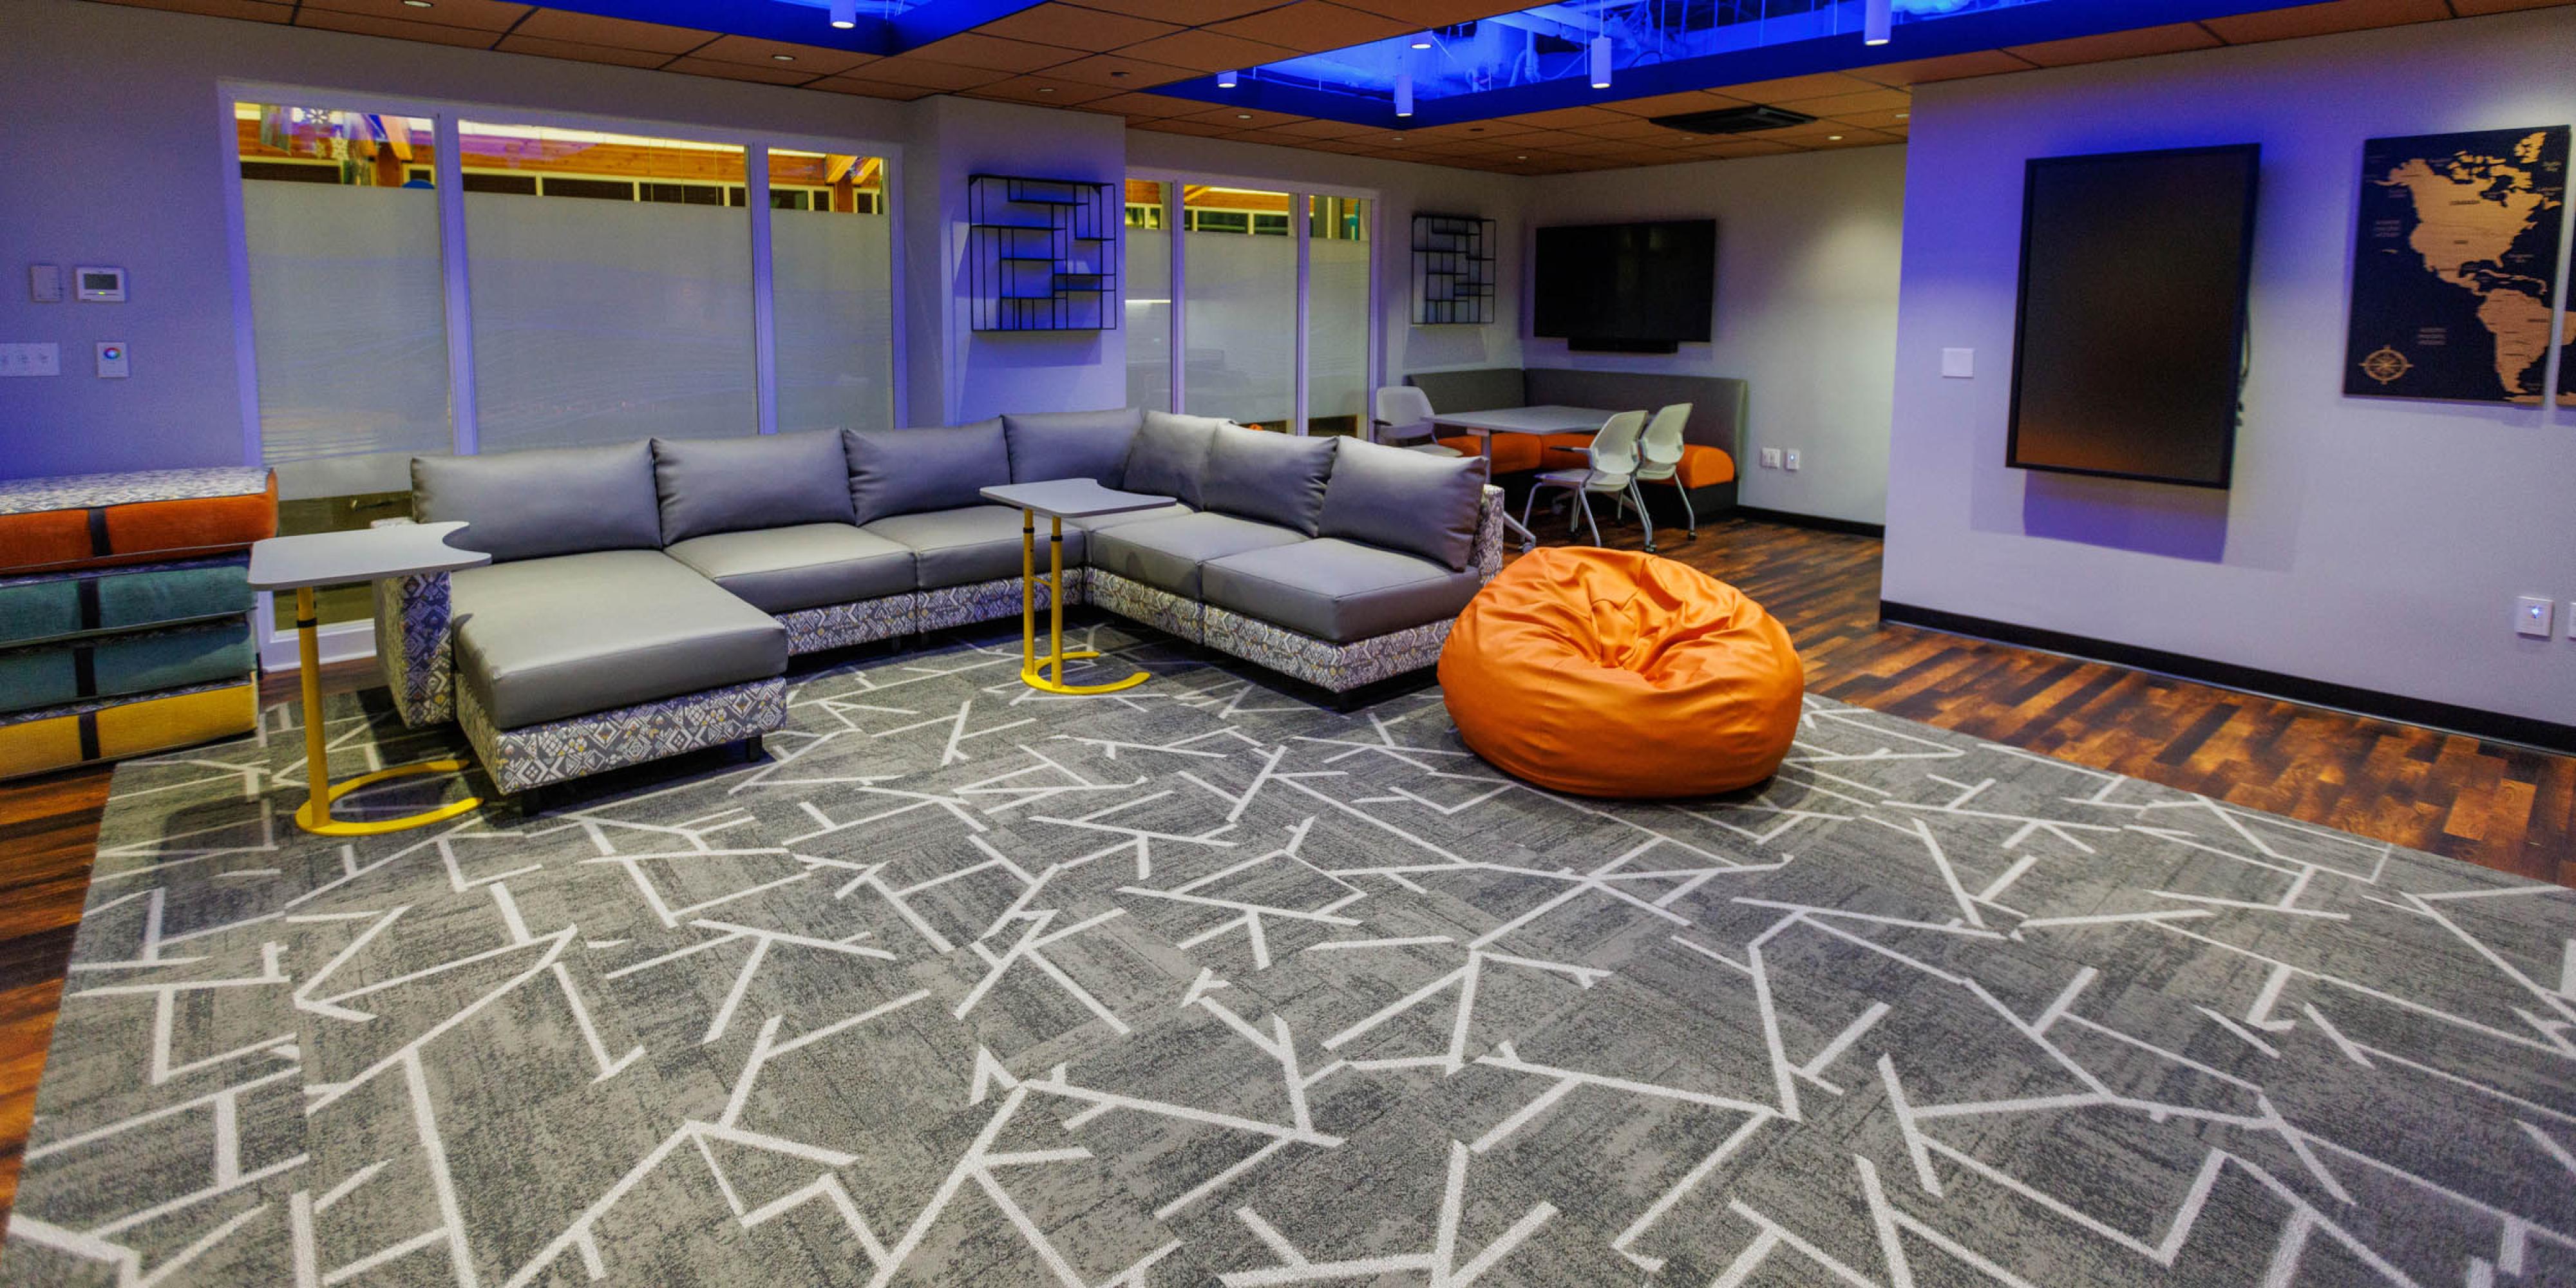 Bentley Multicultural Center after renovations with sectional couch and orange bean bag chair